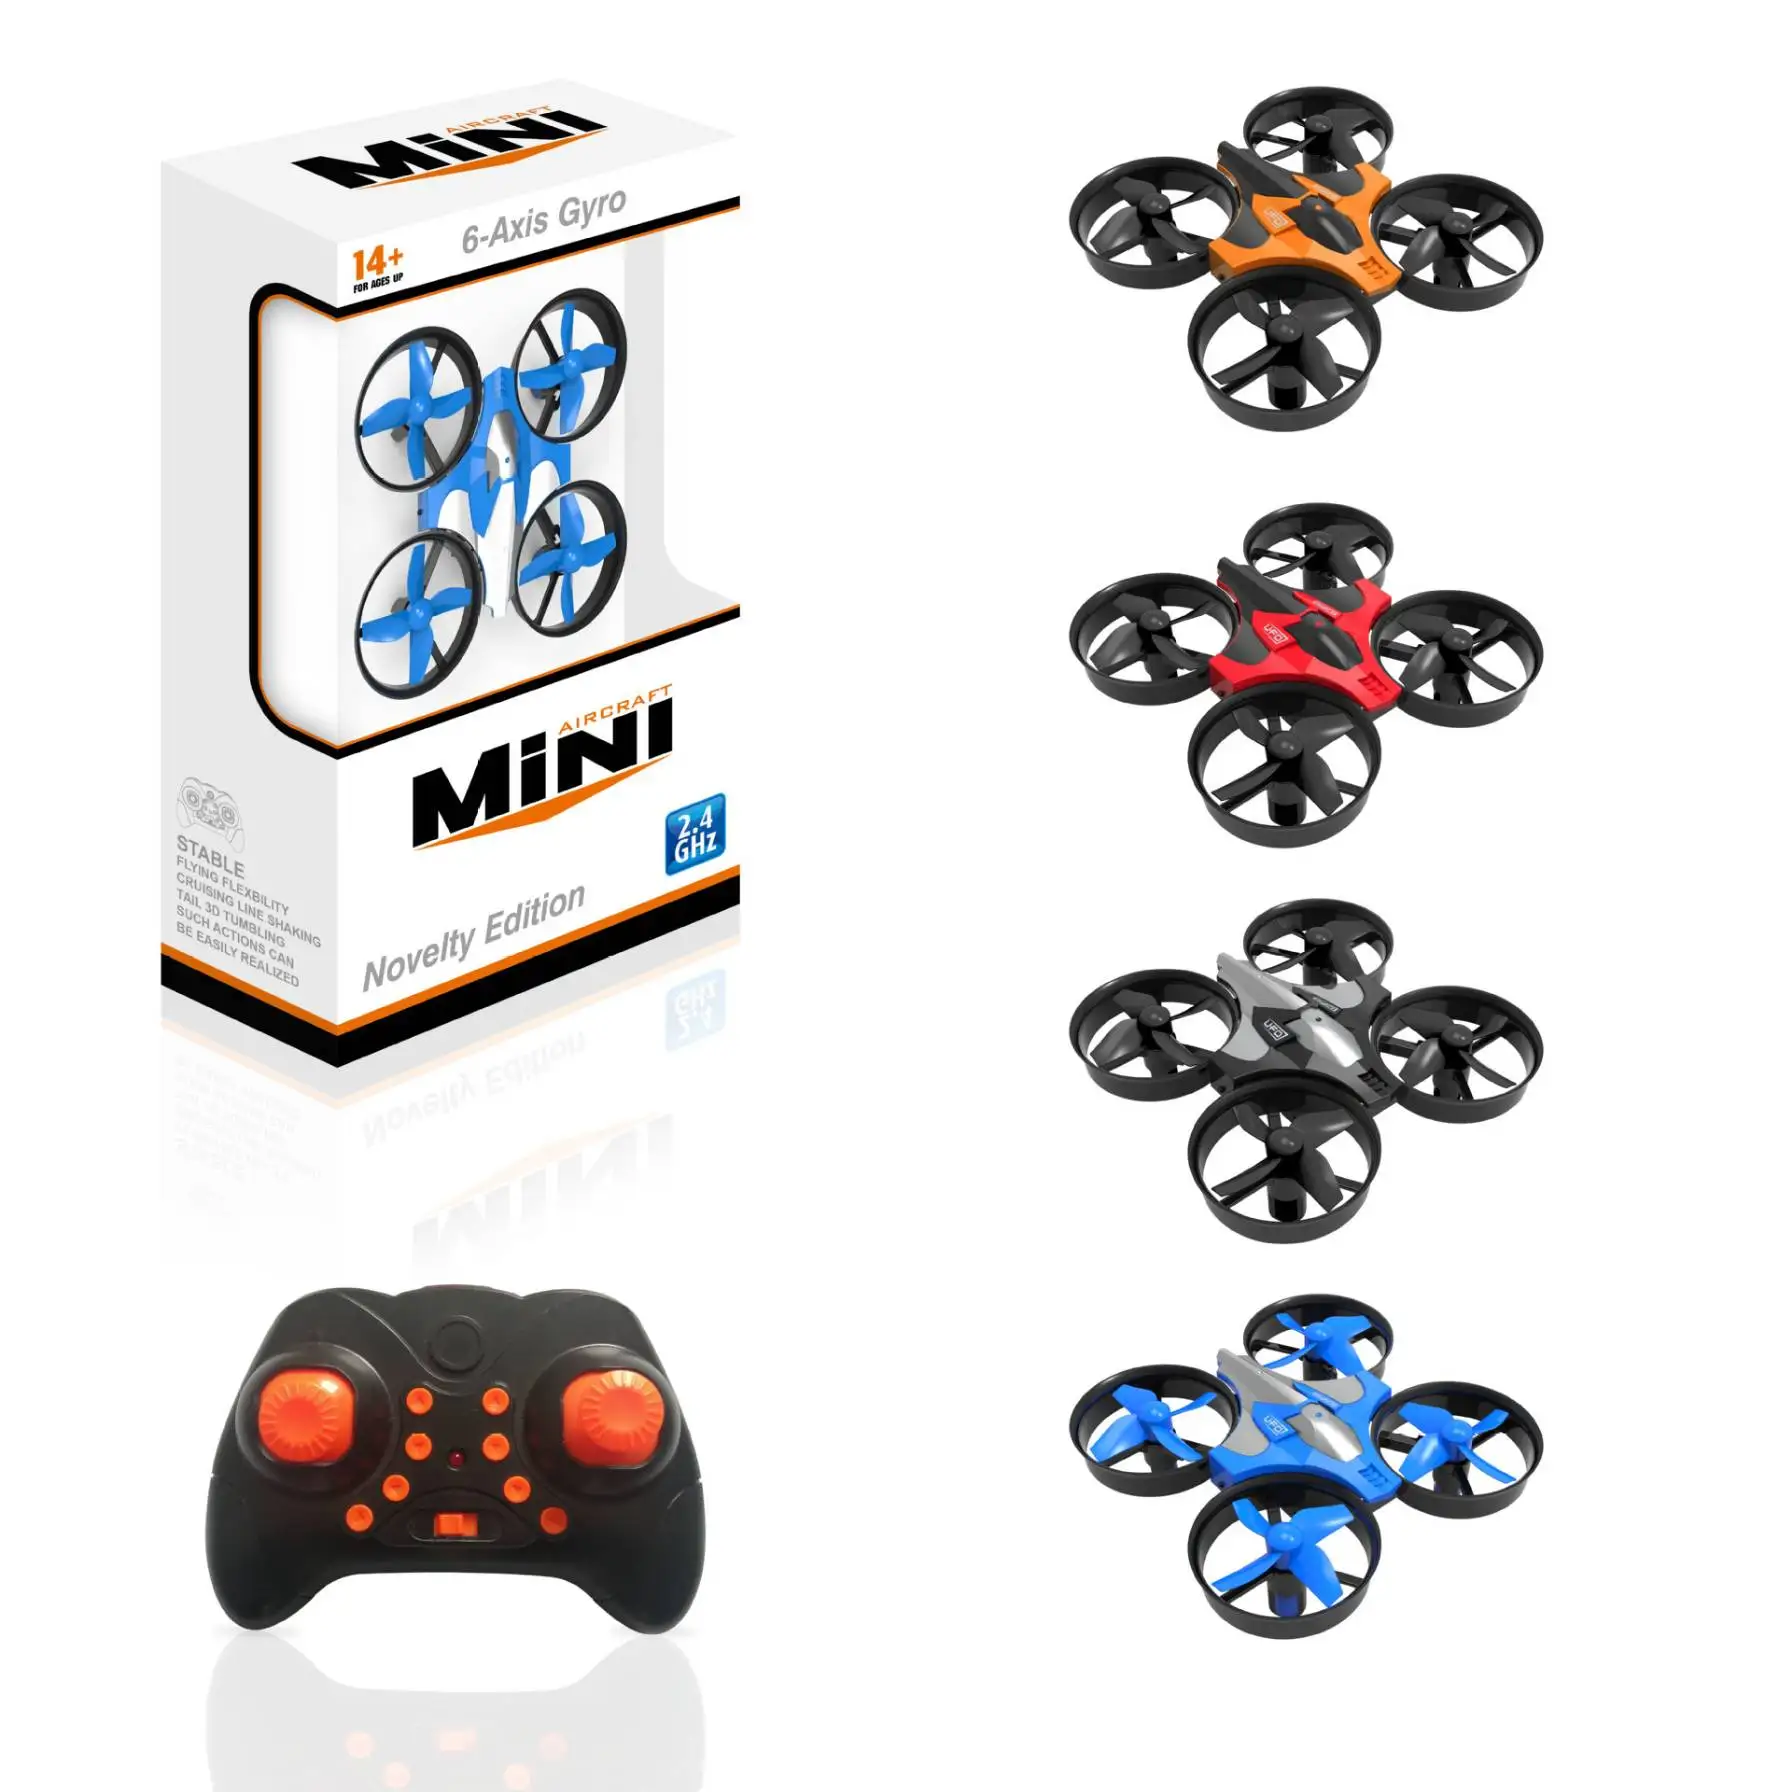 

2019 New Arrival RH807 RC Drone 6-Axis Gyro 3D Flip Headless Mode RC Mini Quadrocopter Toy Model Gift vs JJRC H36 S105, Blue/red/orange/grey